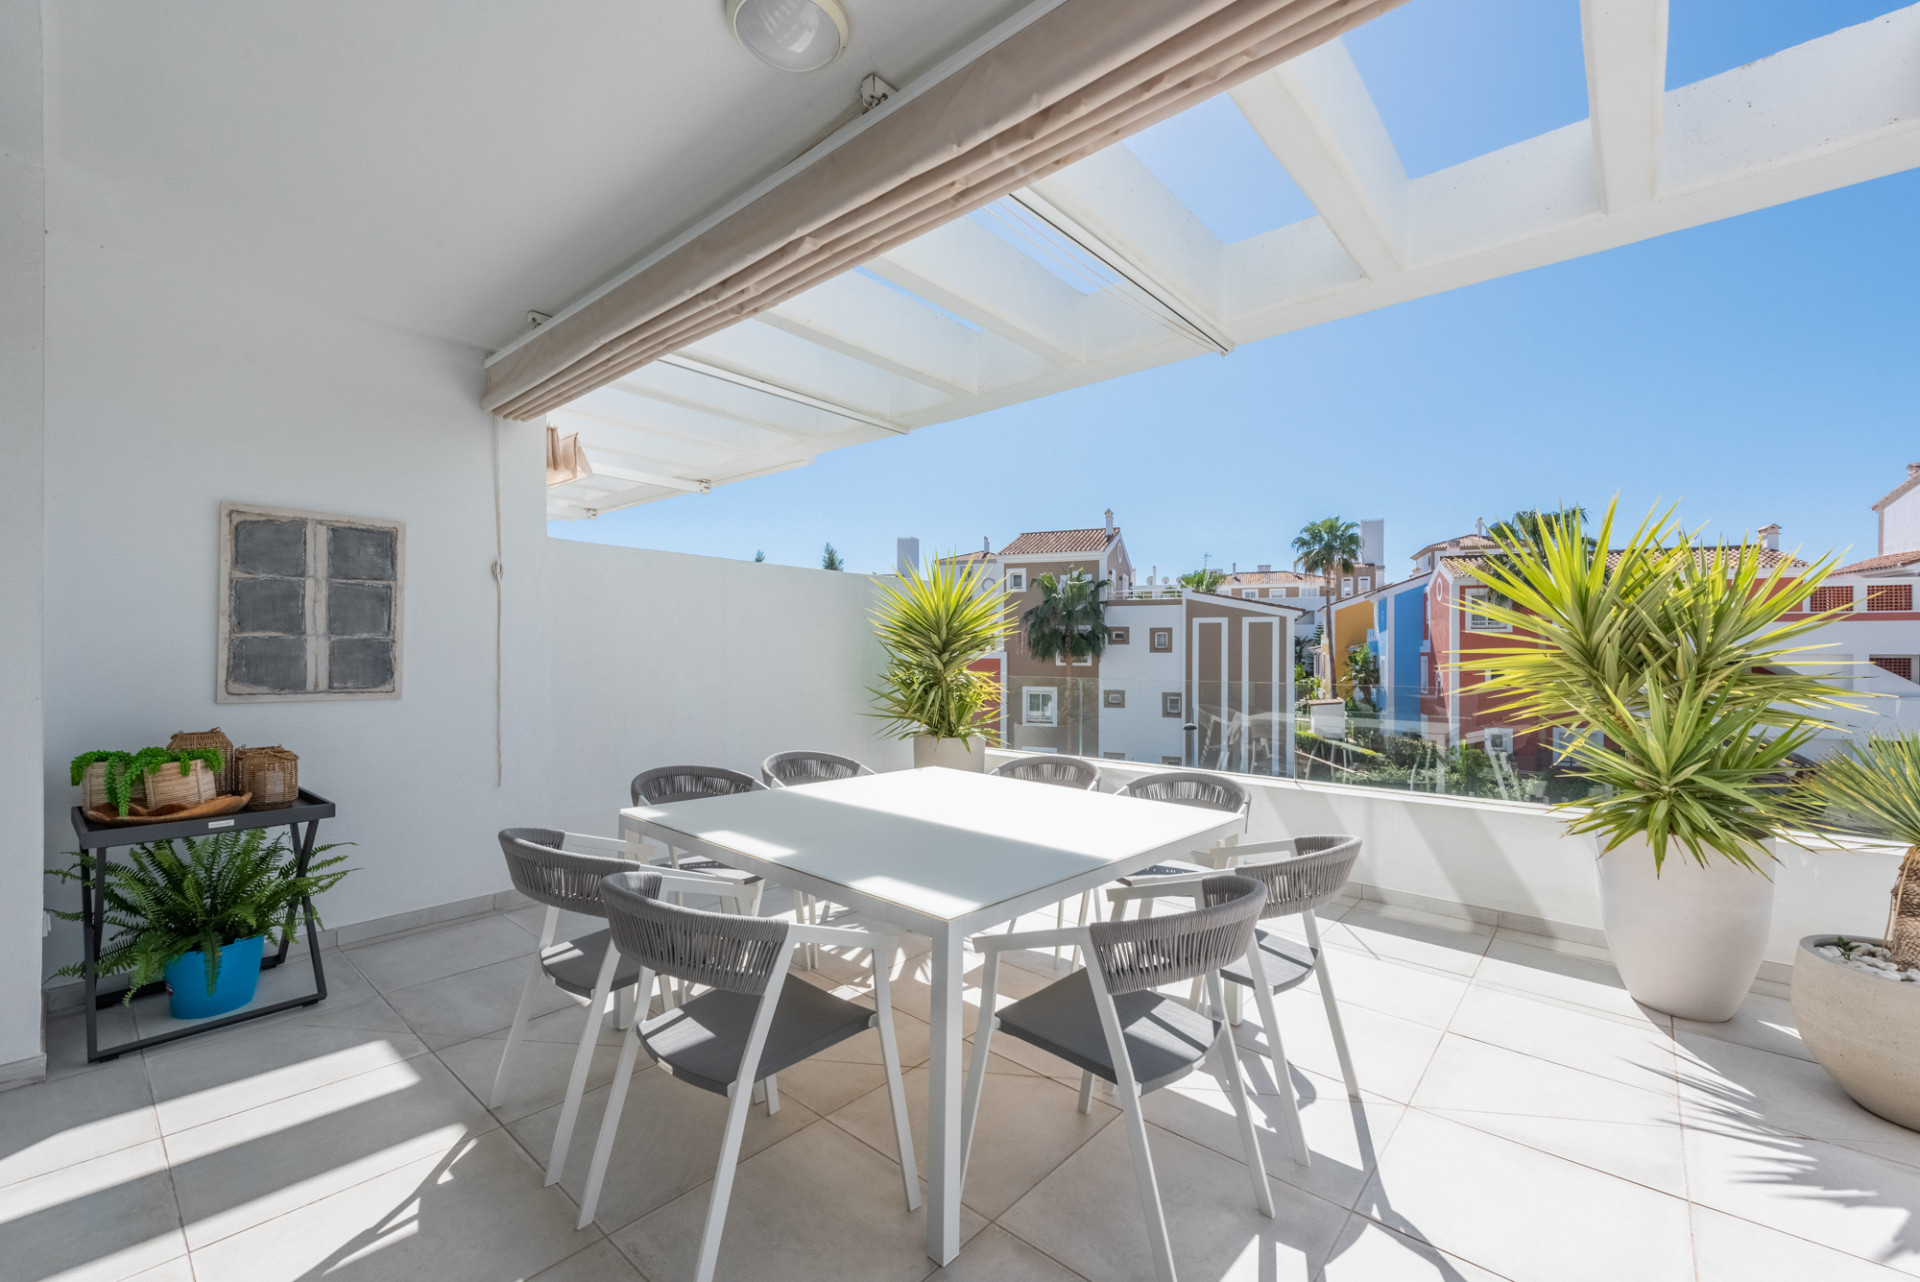 Fabulous penthouse with a huge sunny wrap-around terrace in the recent byuilt Cortijo del Golf complex!